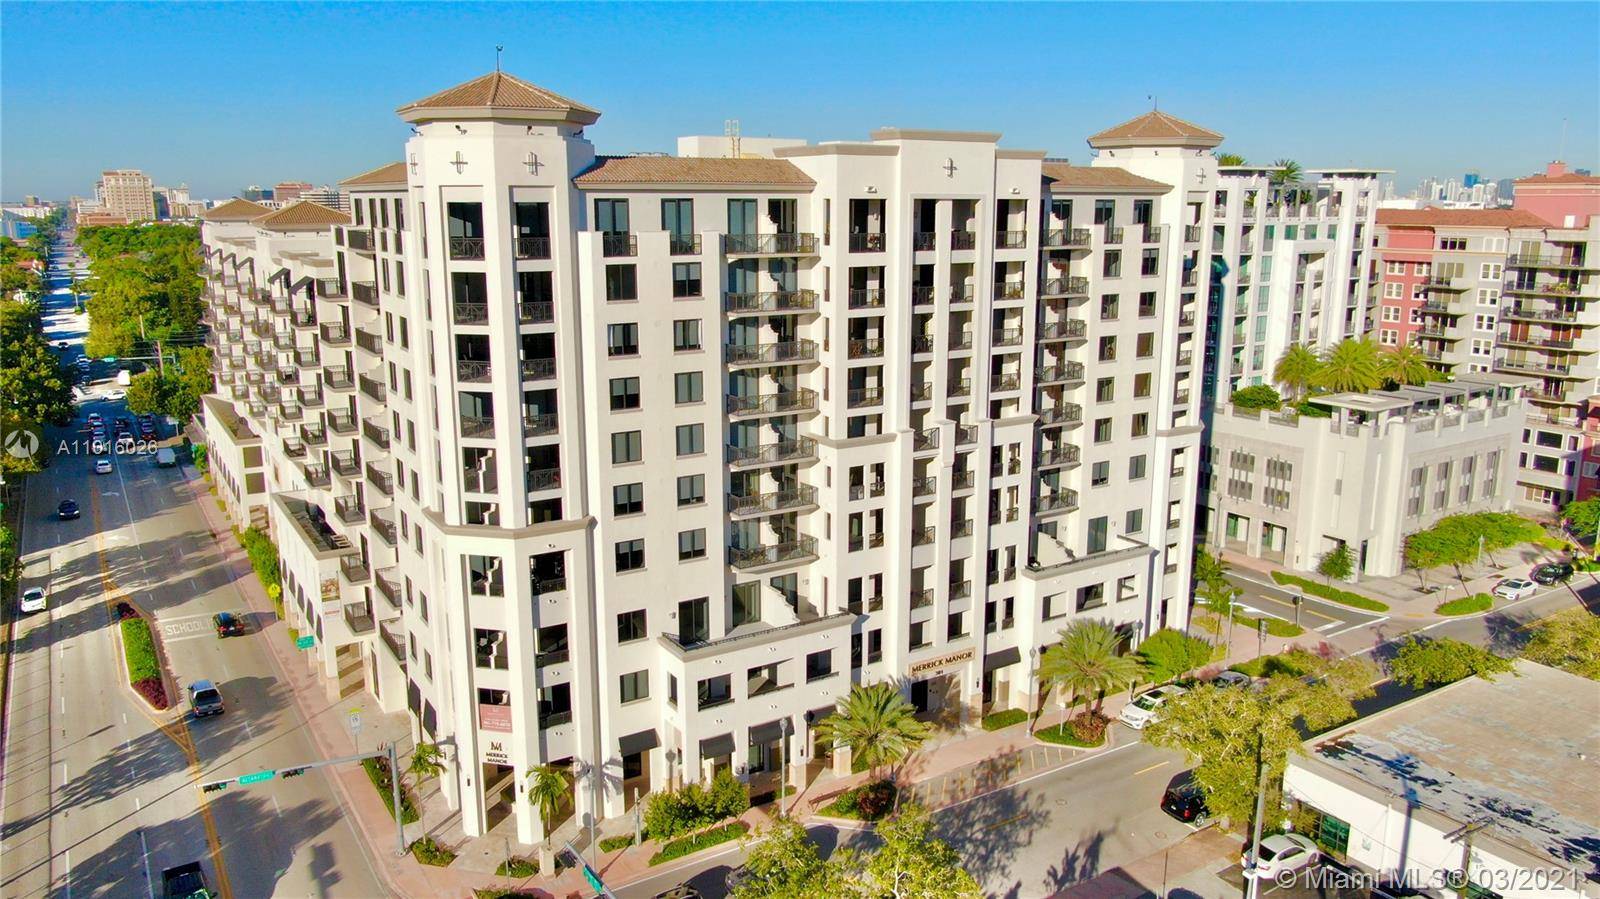 The Astor Companies is pleased to offer a unique sale leaseback investment opportunity of 3 residential condominium units 505, 509, 536 with an avg.